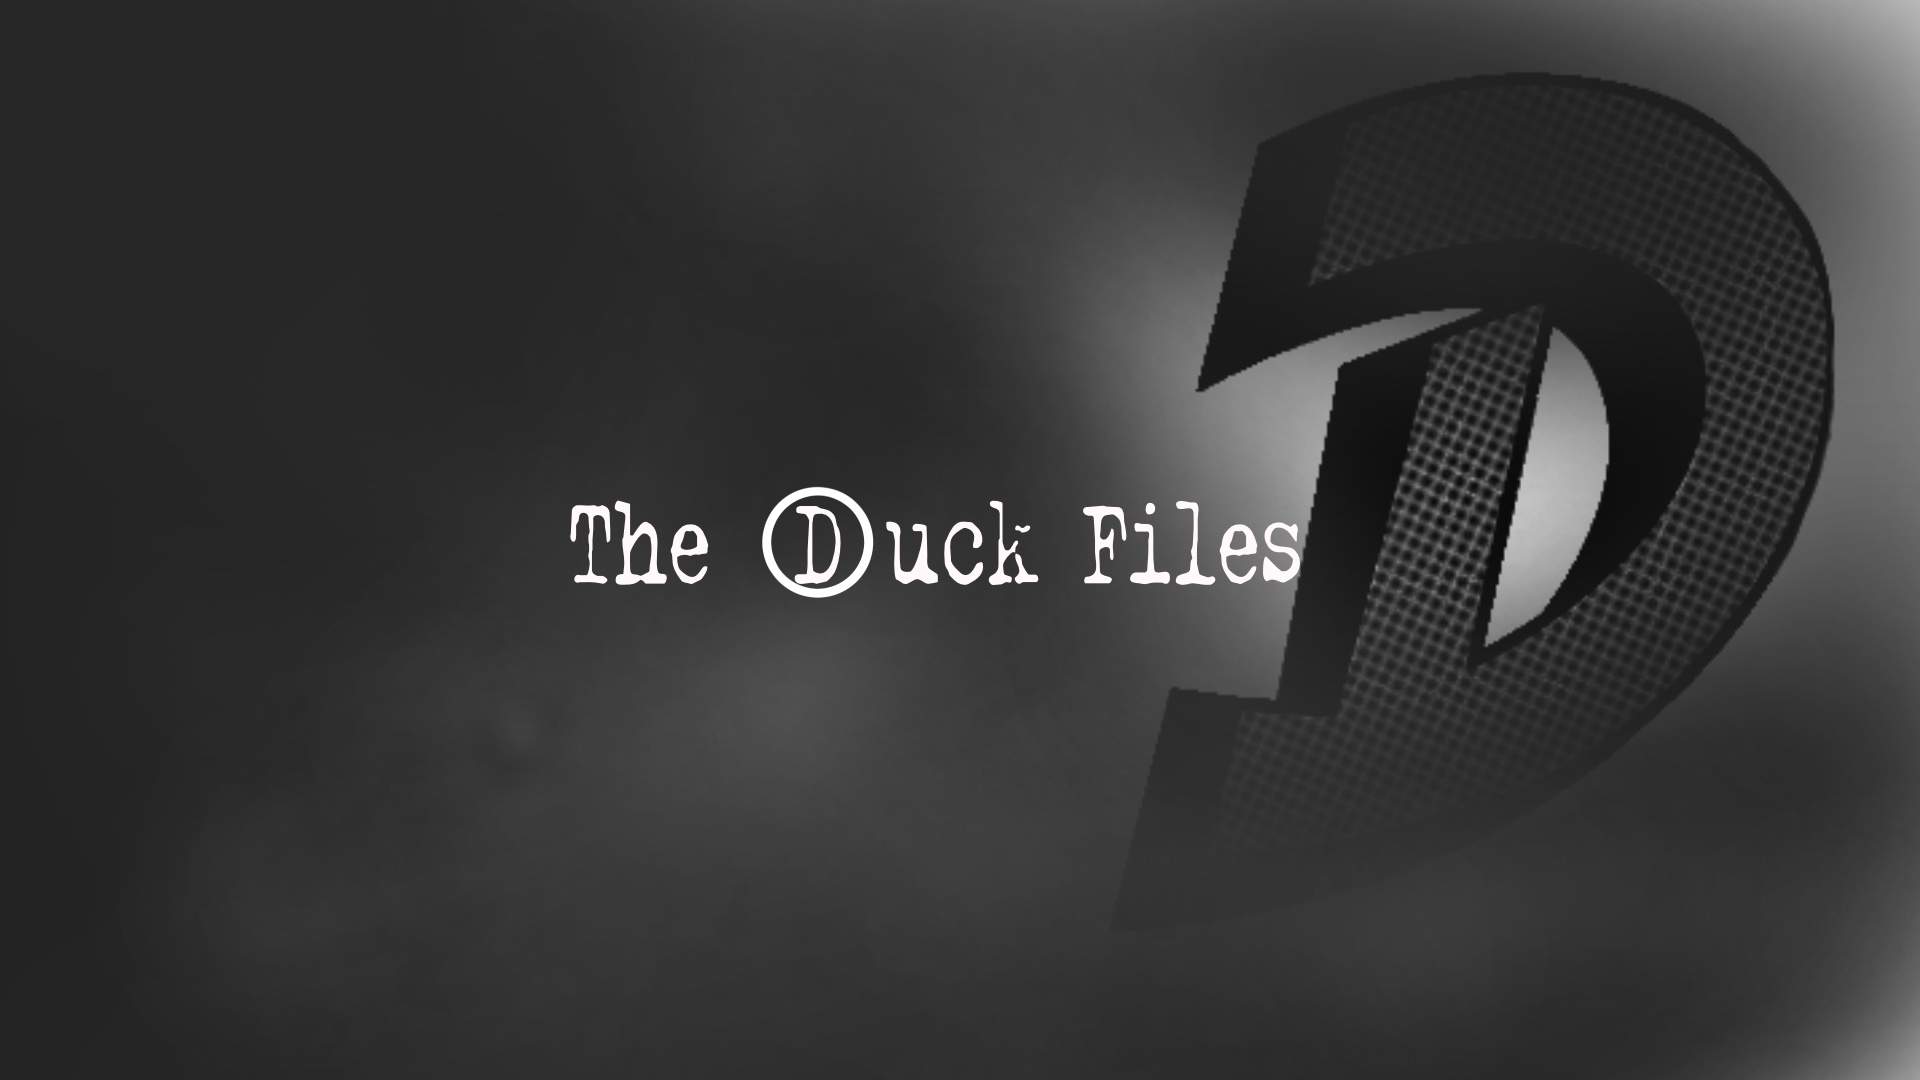 ftp duck free download